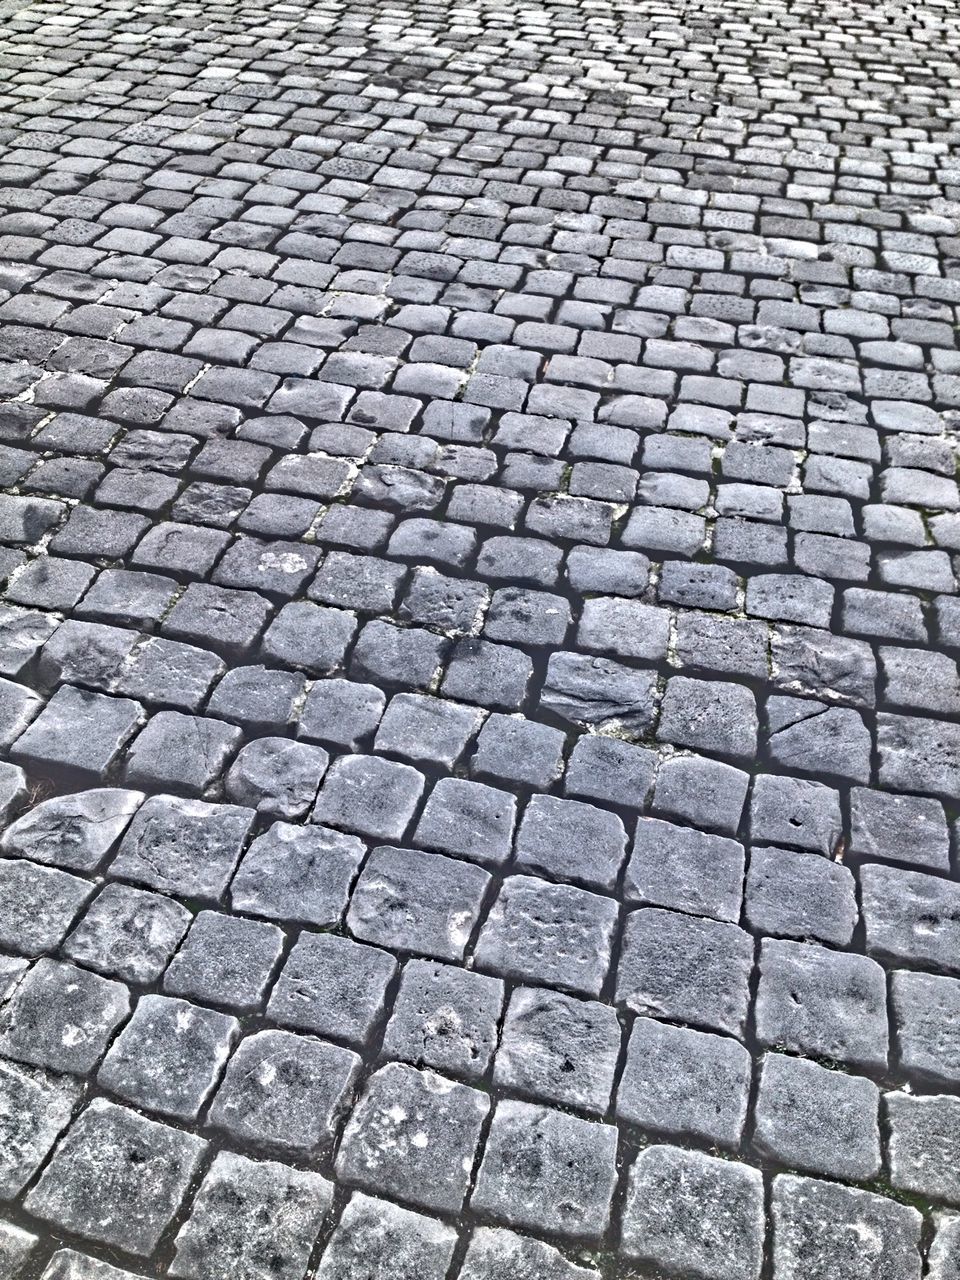 cobblestone, full frame, backgrounds, paving stone, pattern, textured, street, footpath, high angle view, outdoors, no people, day, pavement, sidewalk, repetition, close-up, in a row, sunlight, walkway, surface level